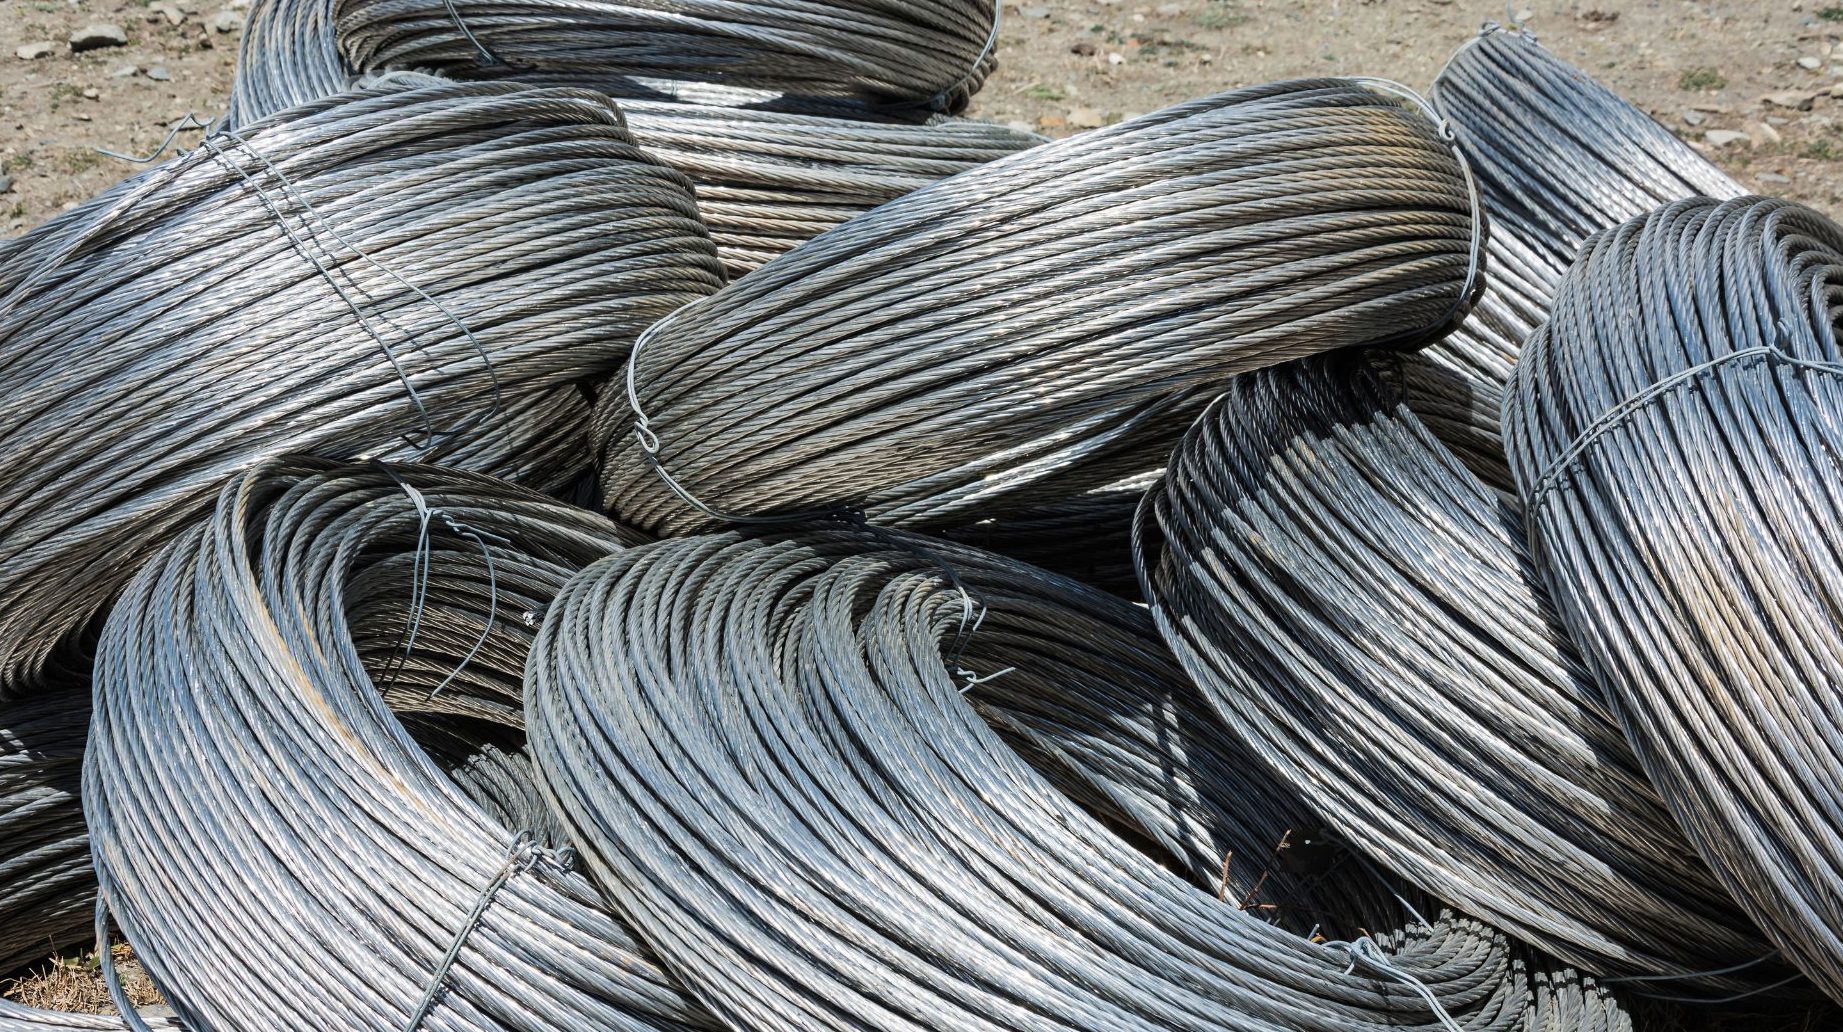 Global Aluminum Wires Market Overview And Prospects – Includes Aluminum Wires Market Size